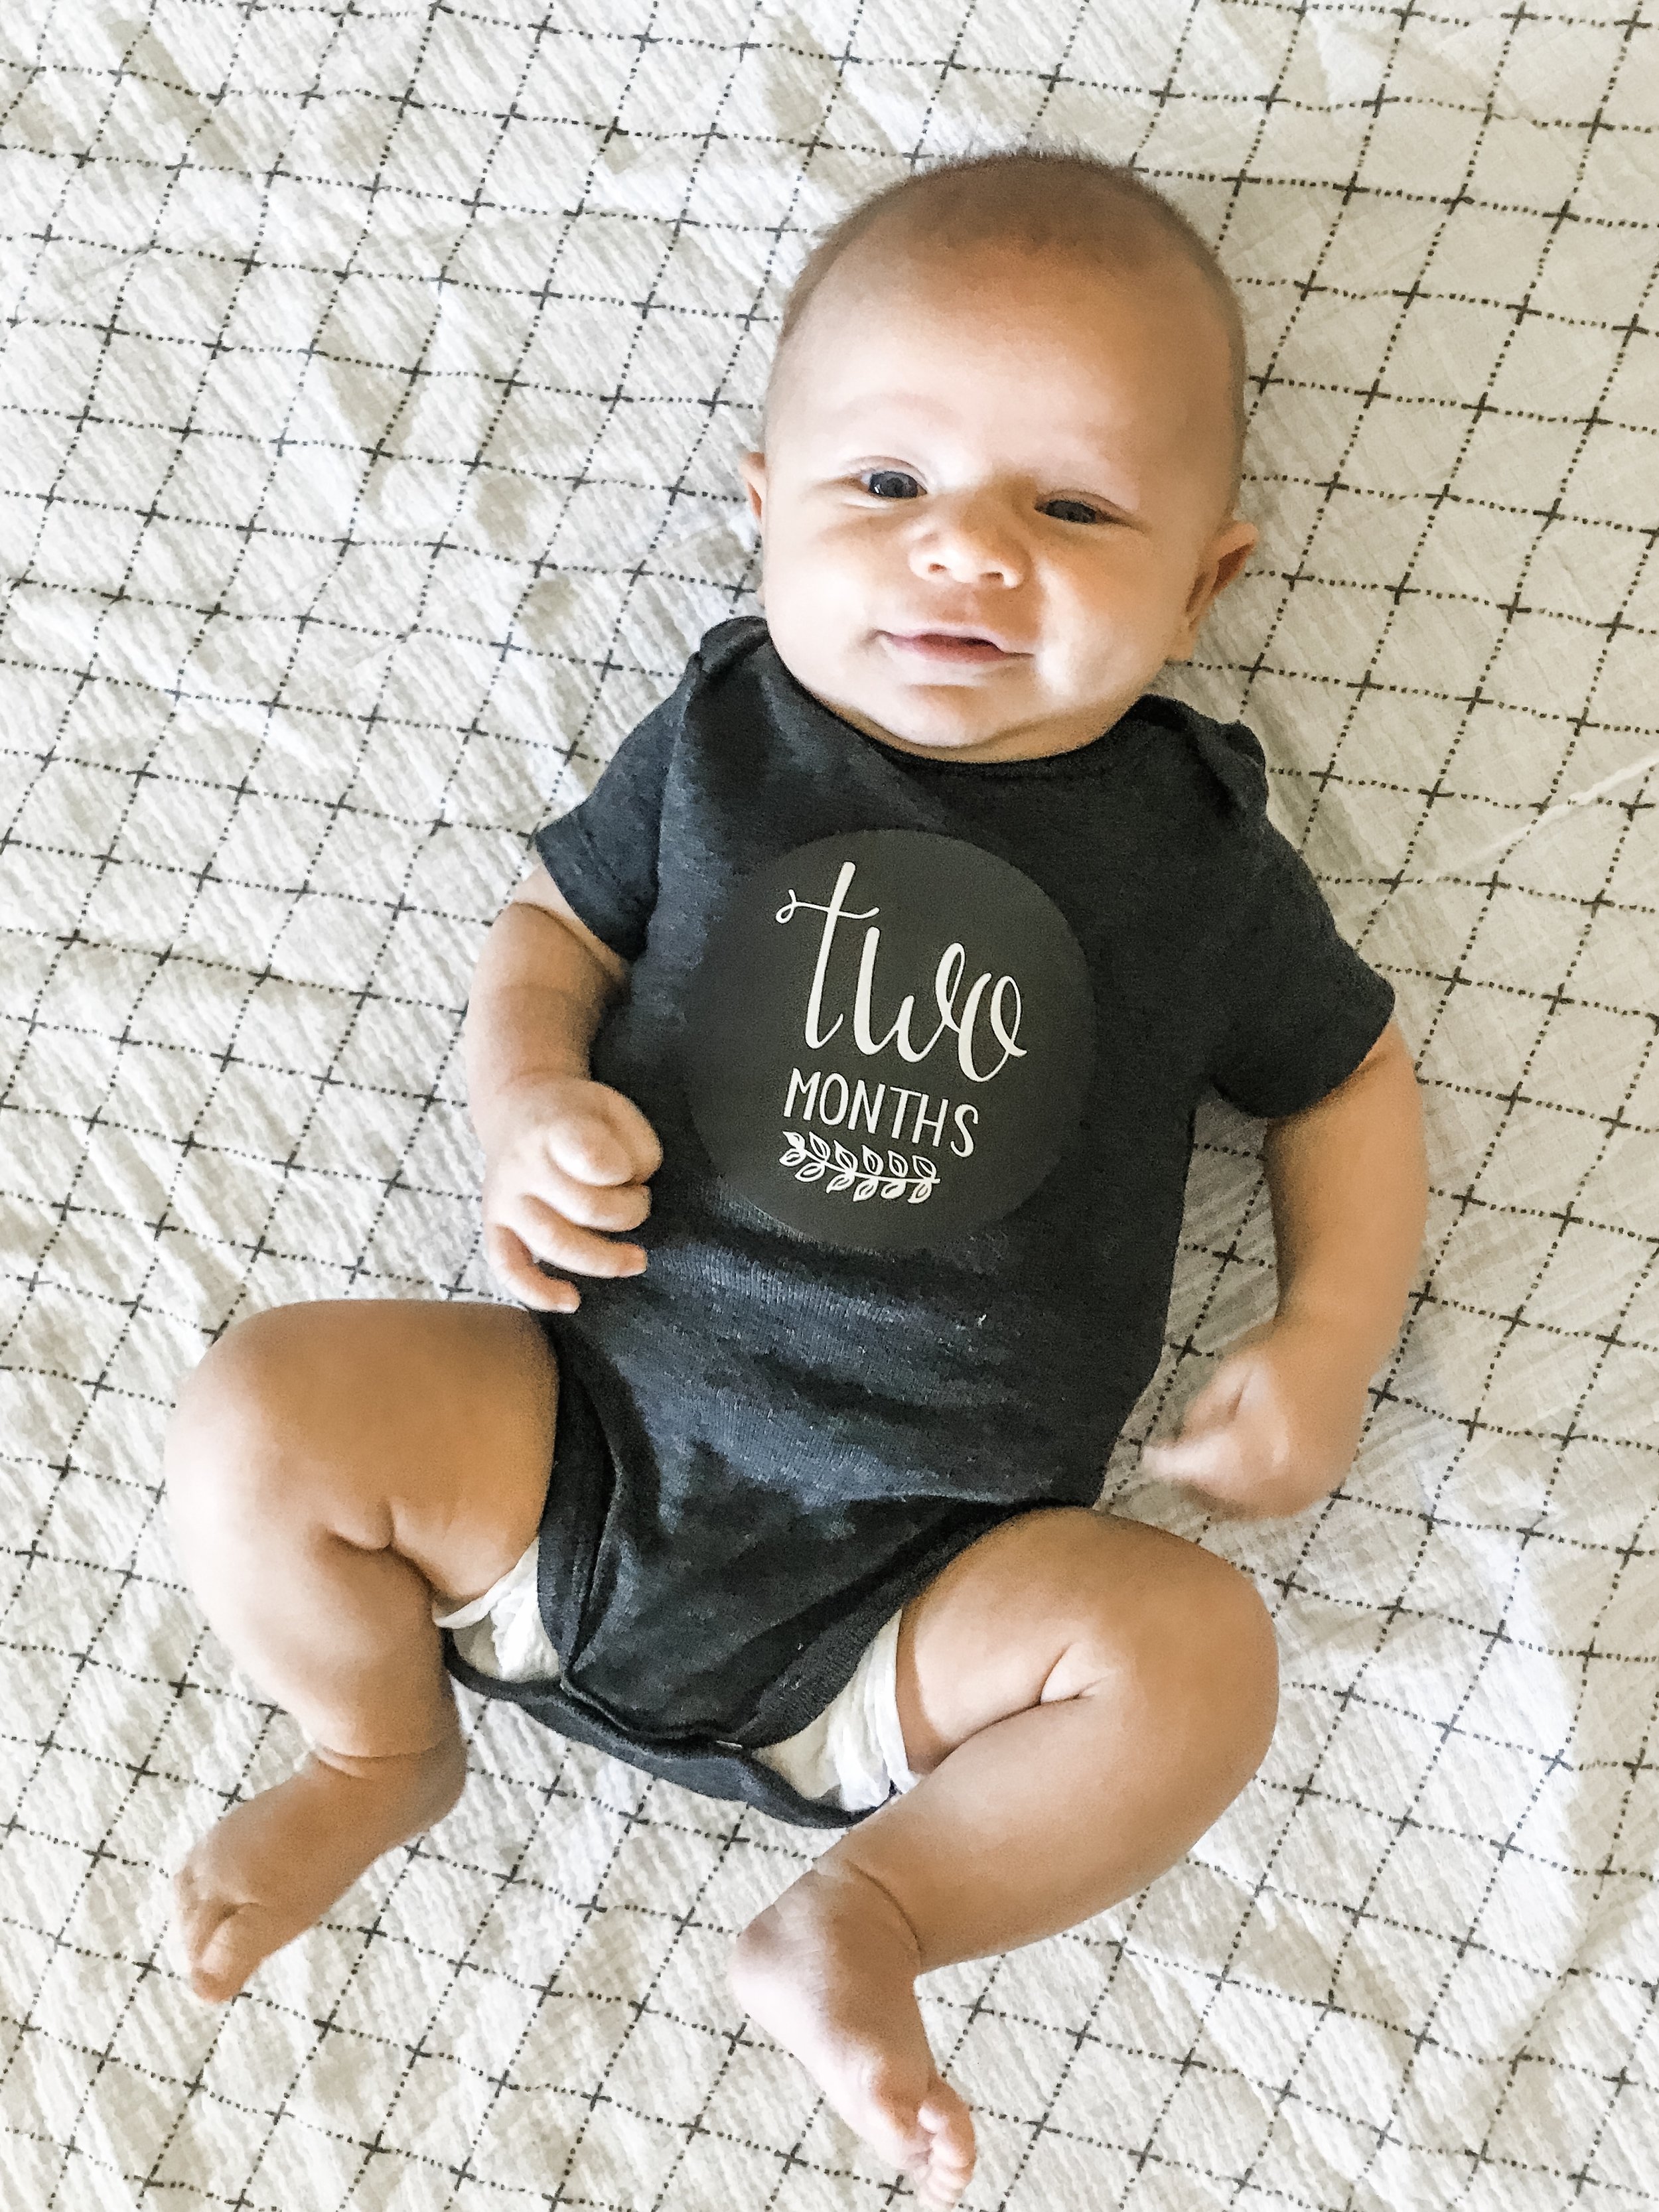 Dear Smith, You Are 2 Months Old! — Ashley Wiseman